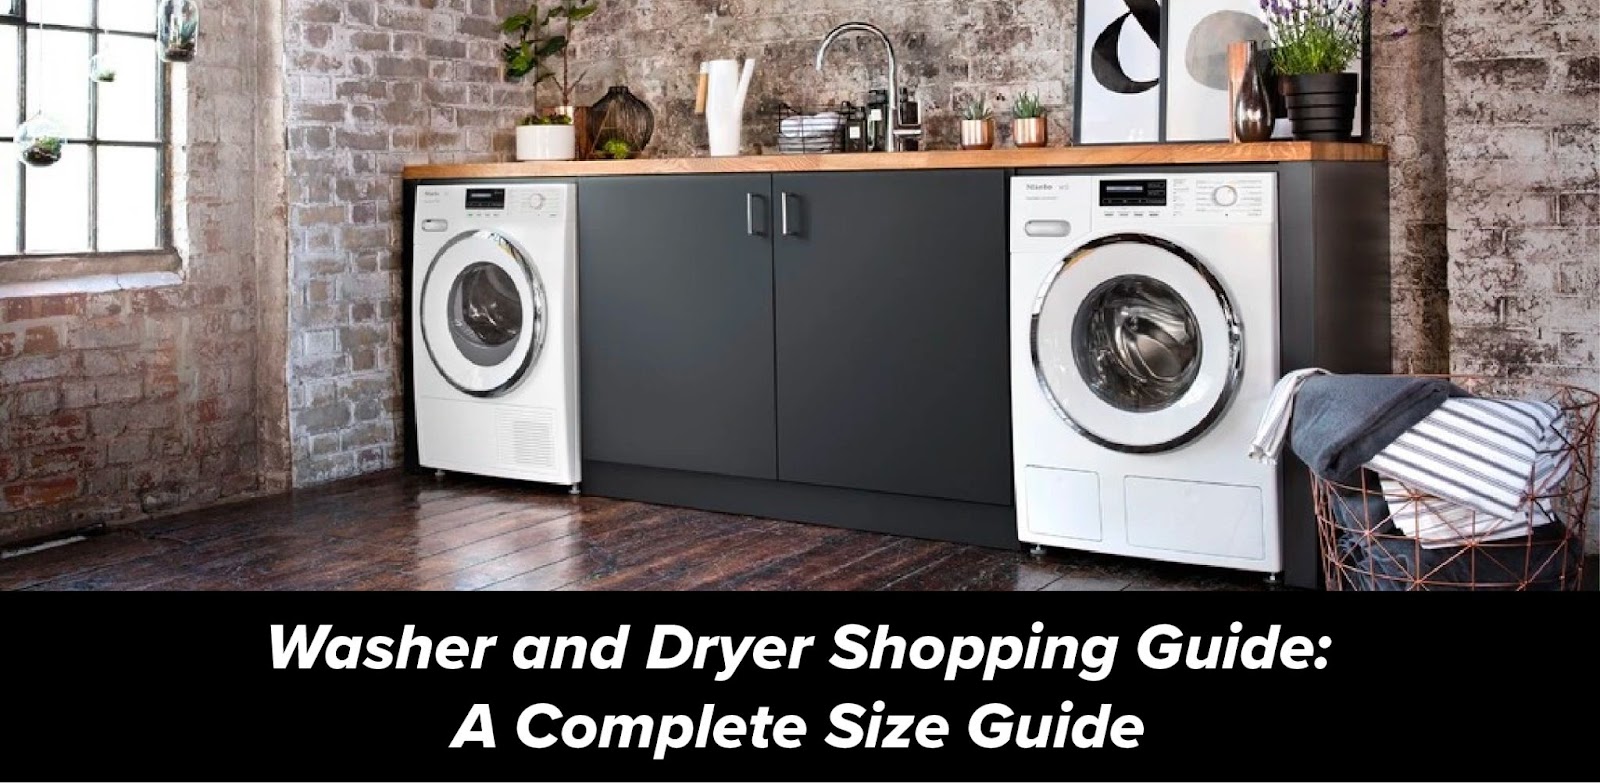 Grand Appliance Laundry Sizing Guide